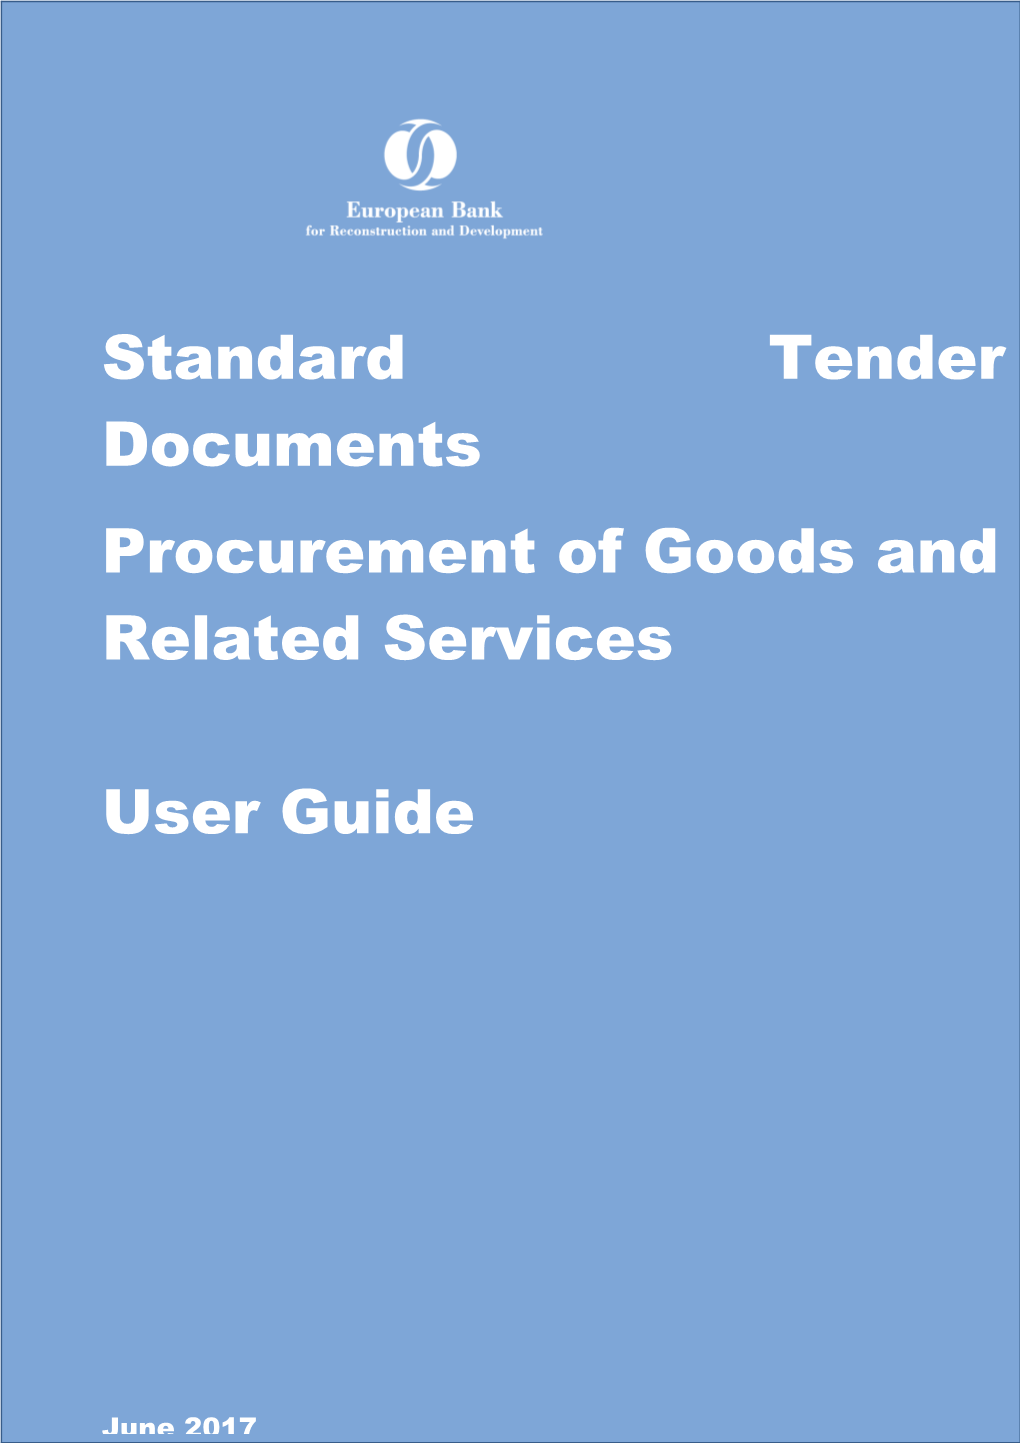 Standard Tender Document: Procurement of Goods and Related Services - User Guide